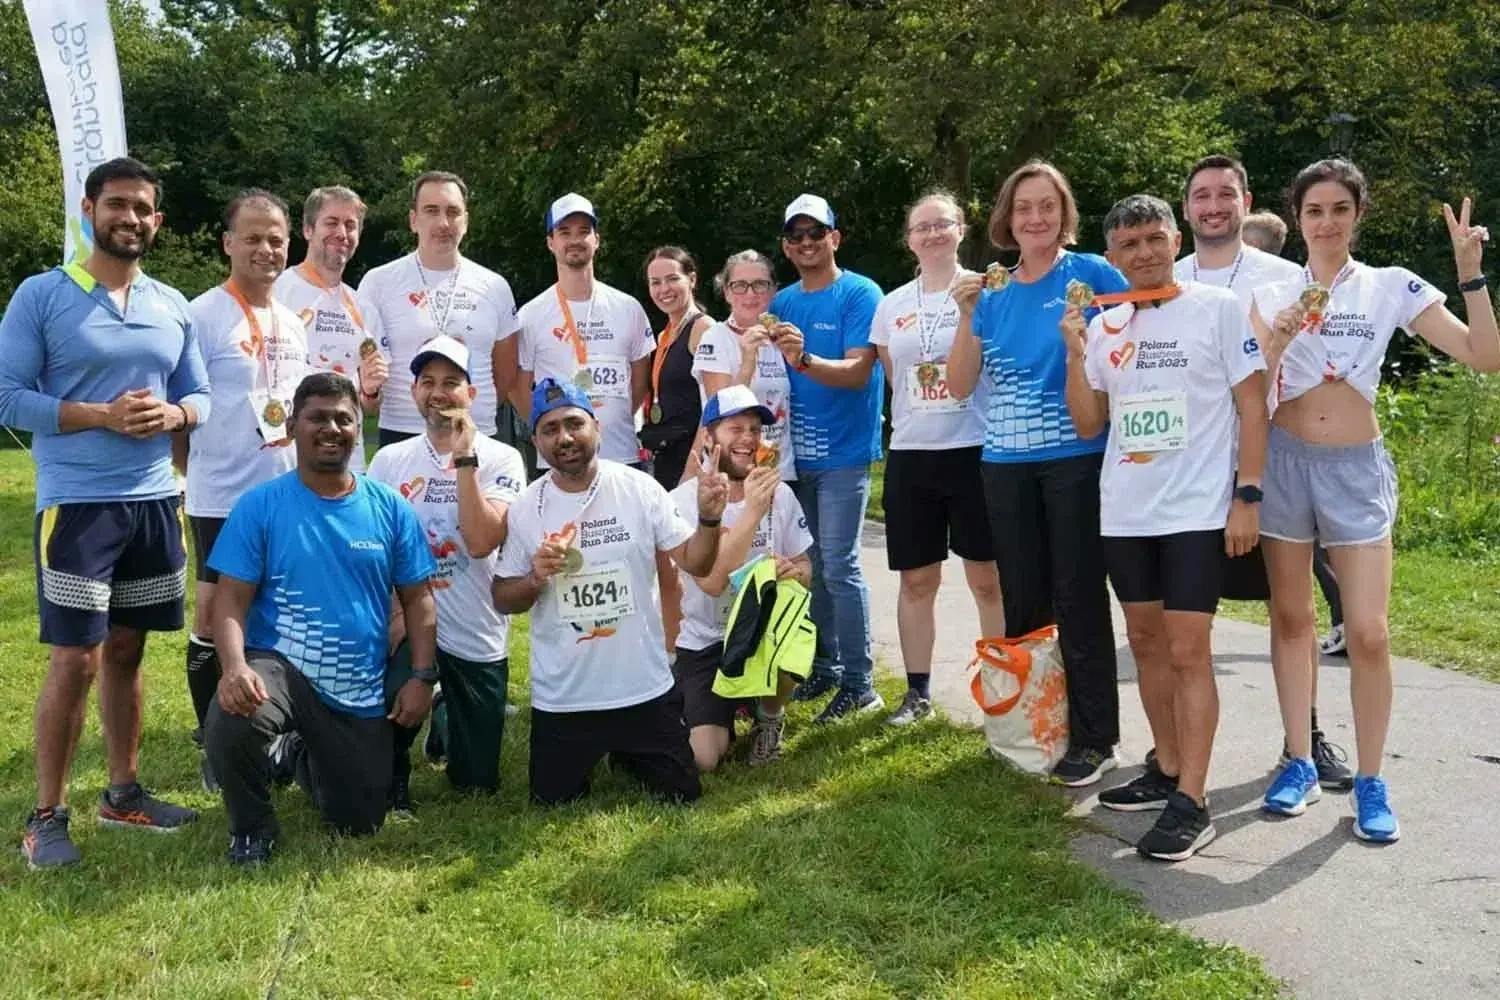 Radiating positivity, determination and boundless energy after charity run